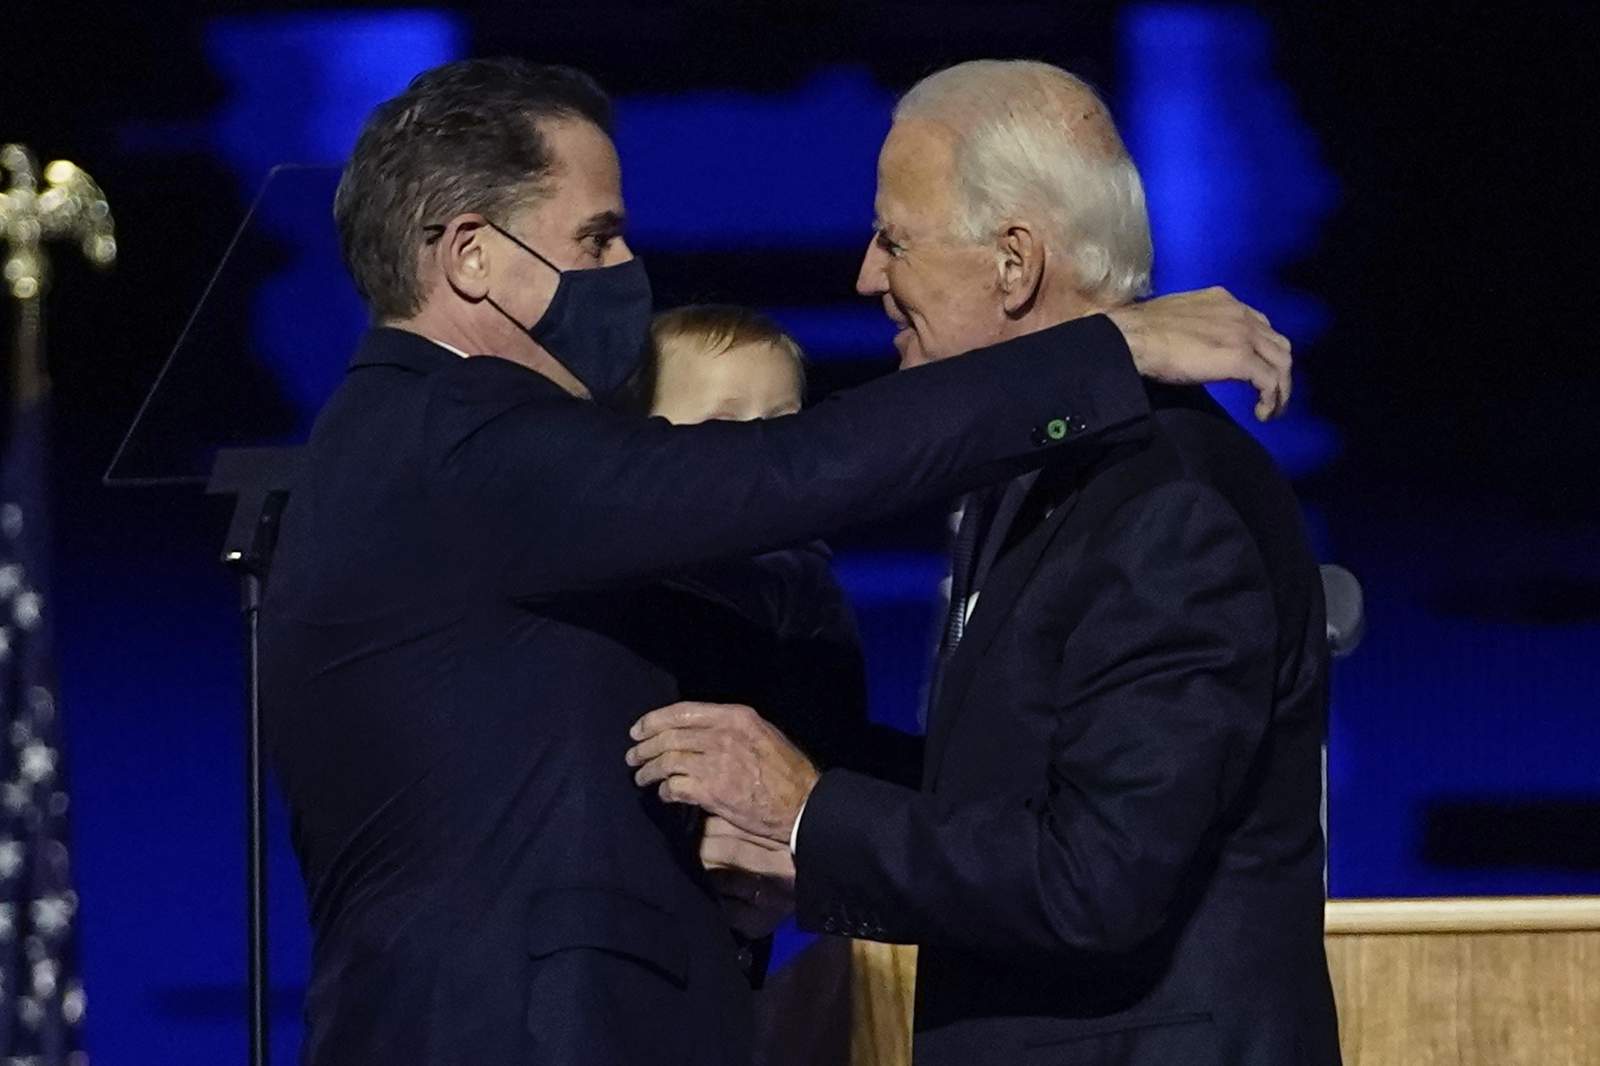 Biden's transition contends with probe into son's finances